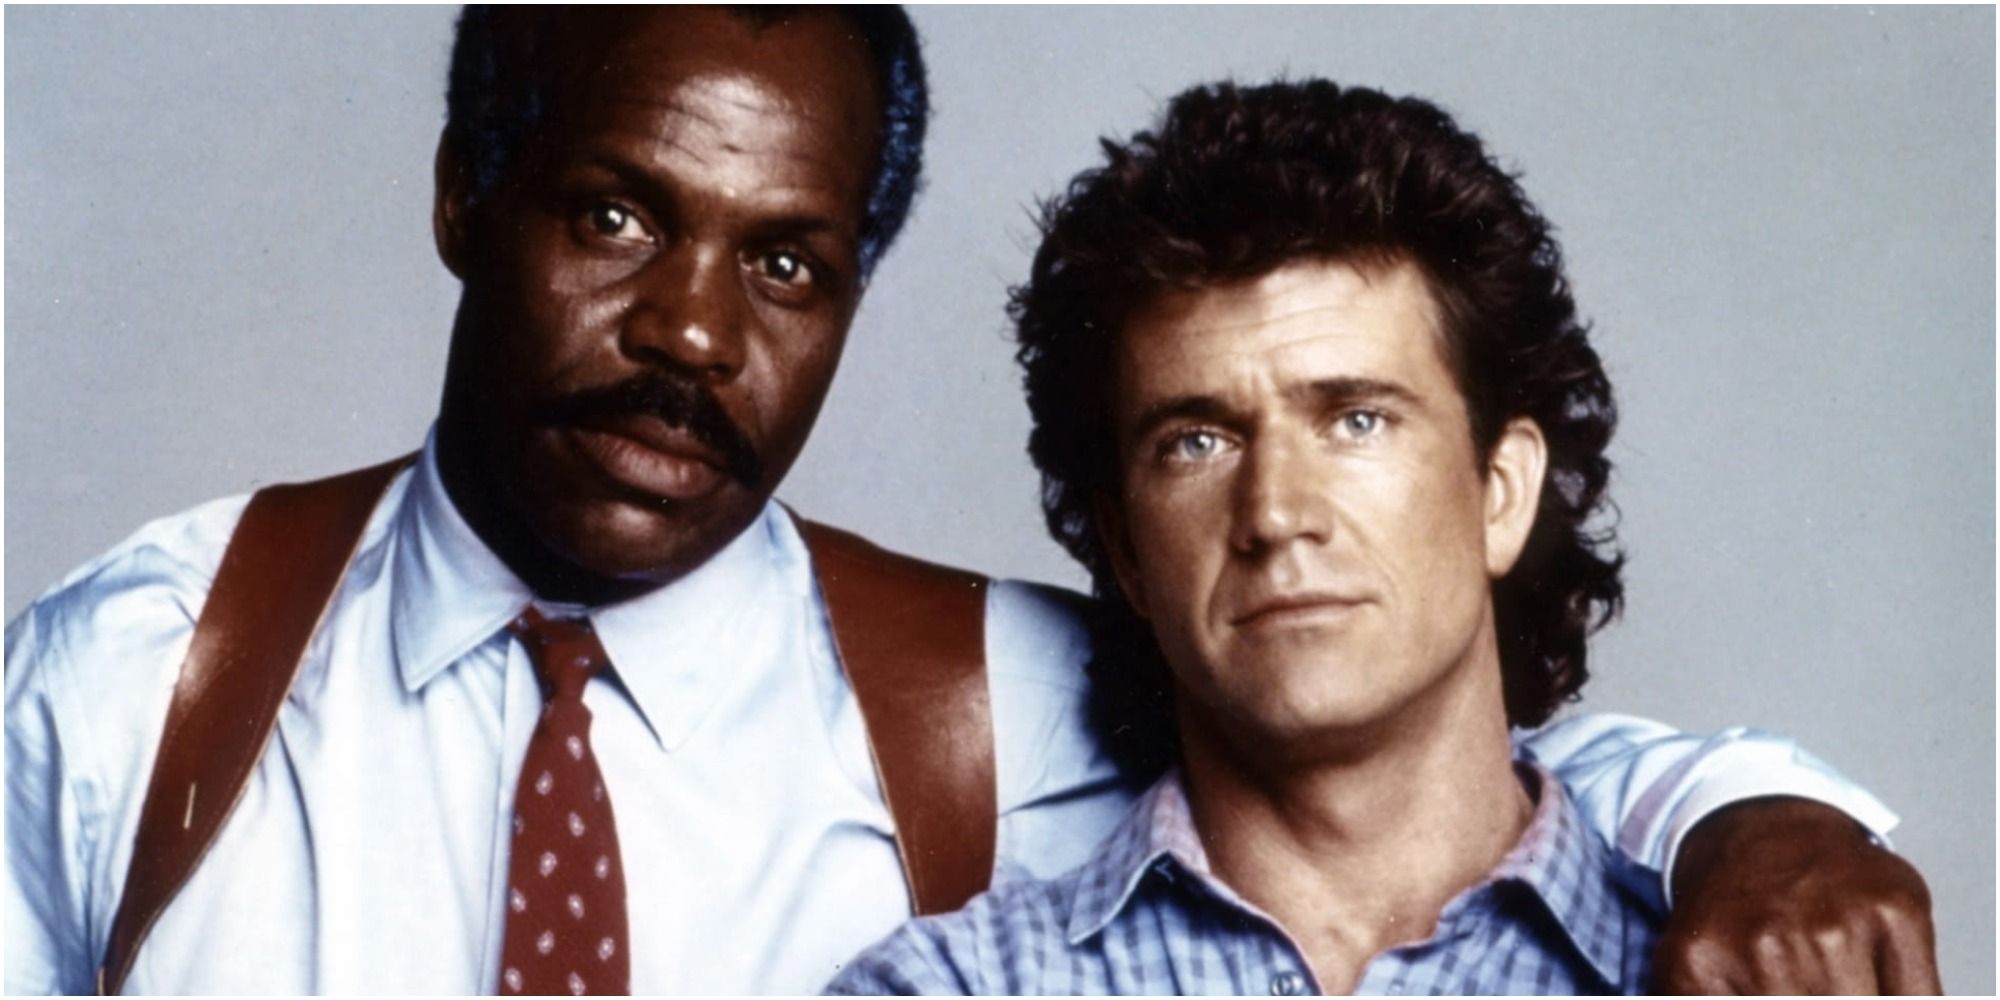 Mel Gibson and Danny Glover pose for a promotional image from Lethal Weapon 